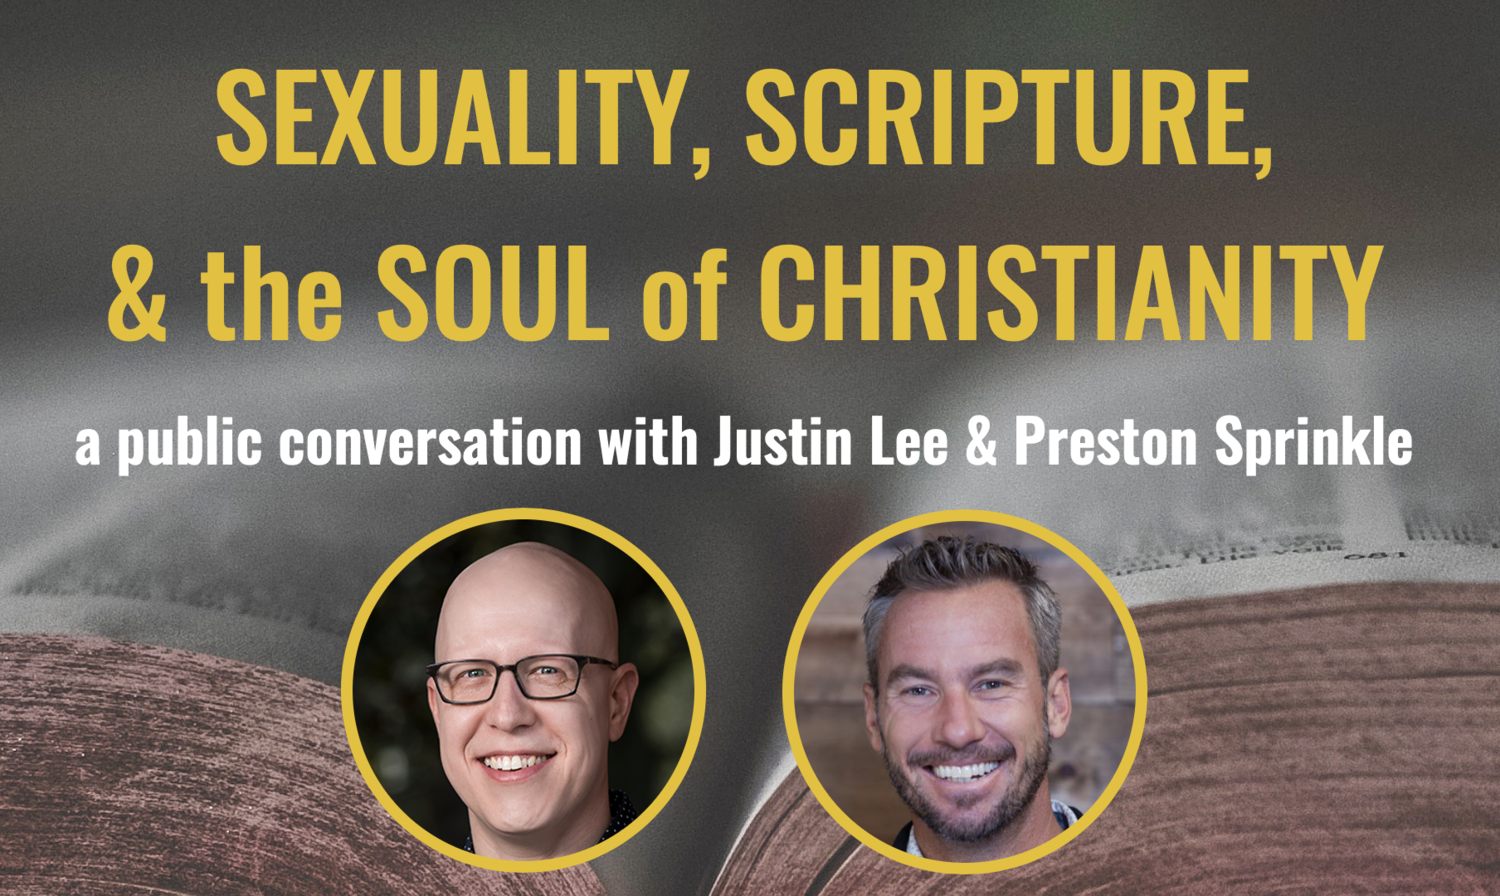 #731 - A Dialogue with Justin Lee about Faith, Sexuality & Gender